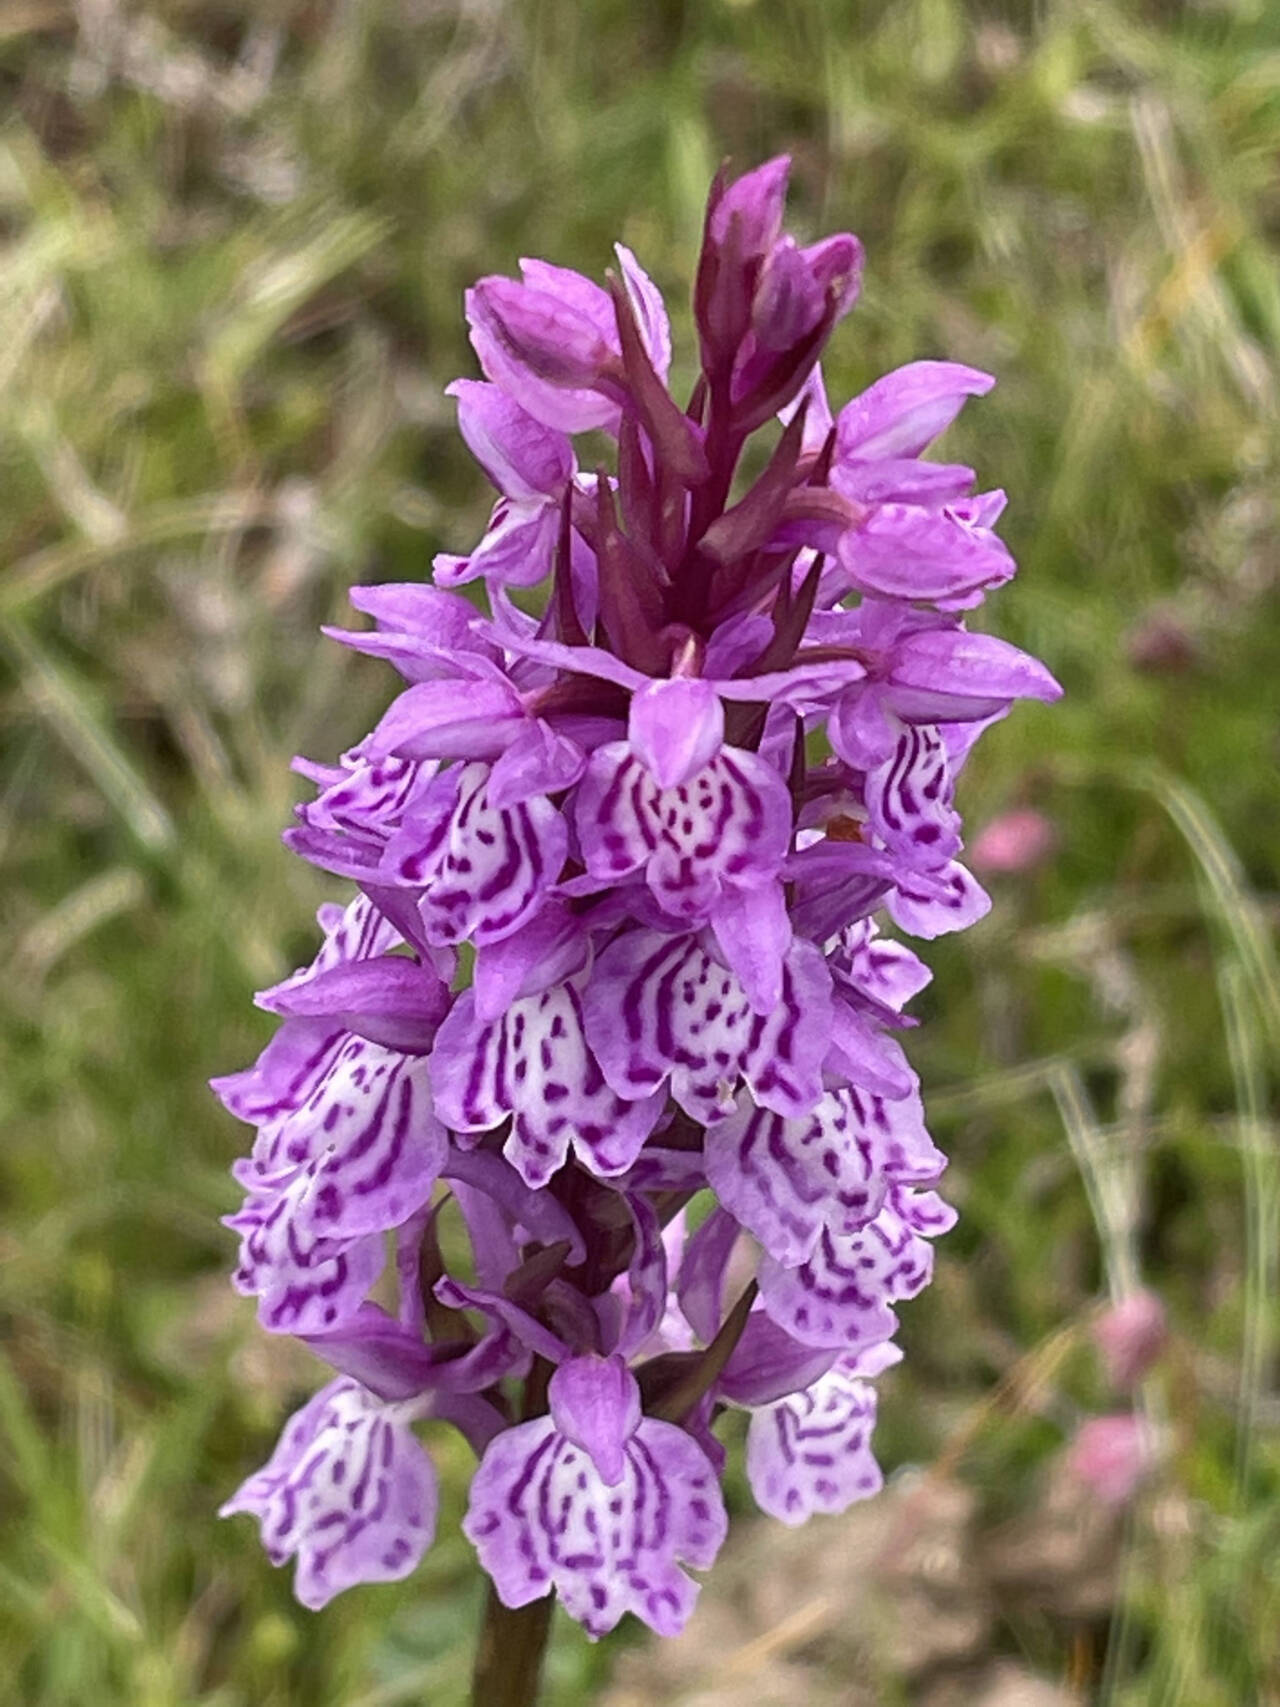 Photo by Carol Bernthal/Adam Henley / More than 22 species of wild orchids are found in the Pyrenees, some of them found nowhere else in the world.